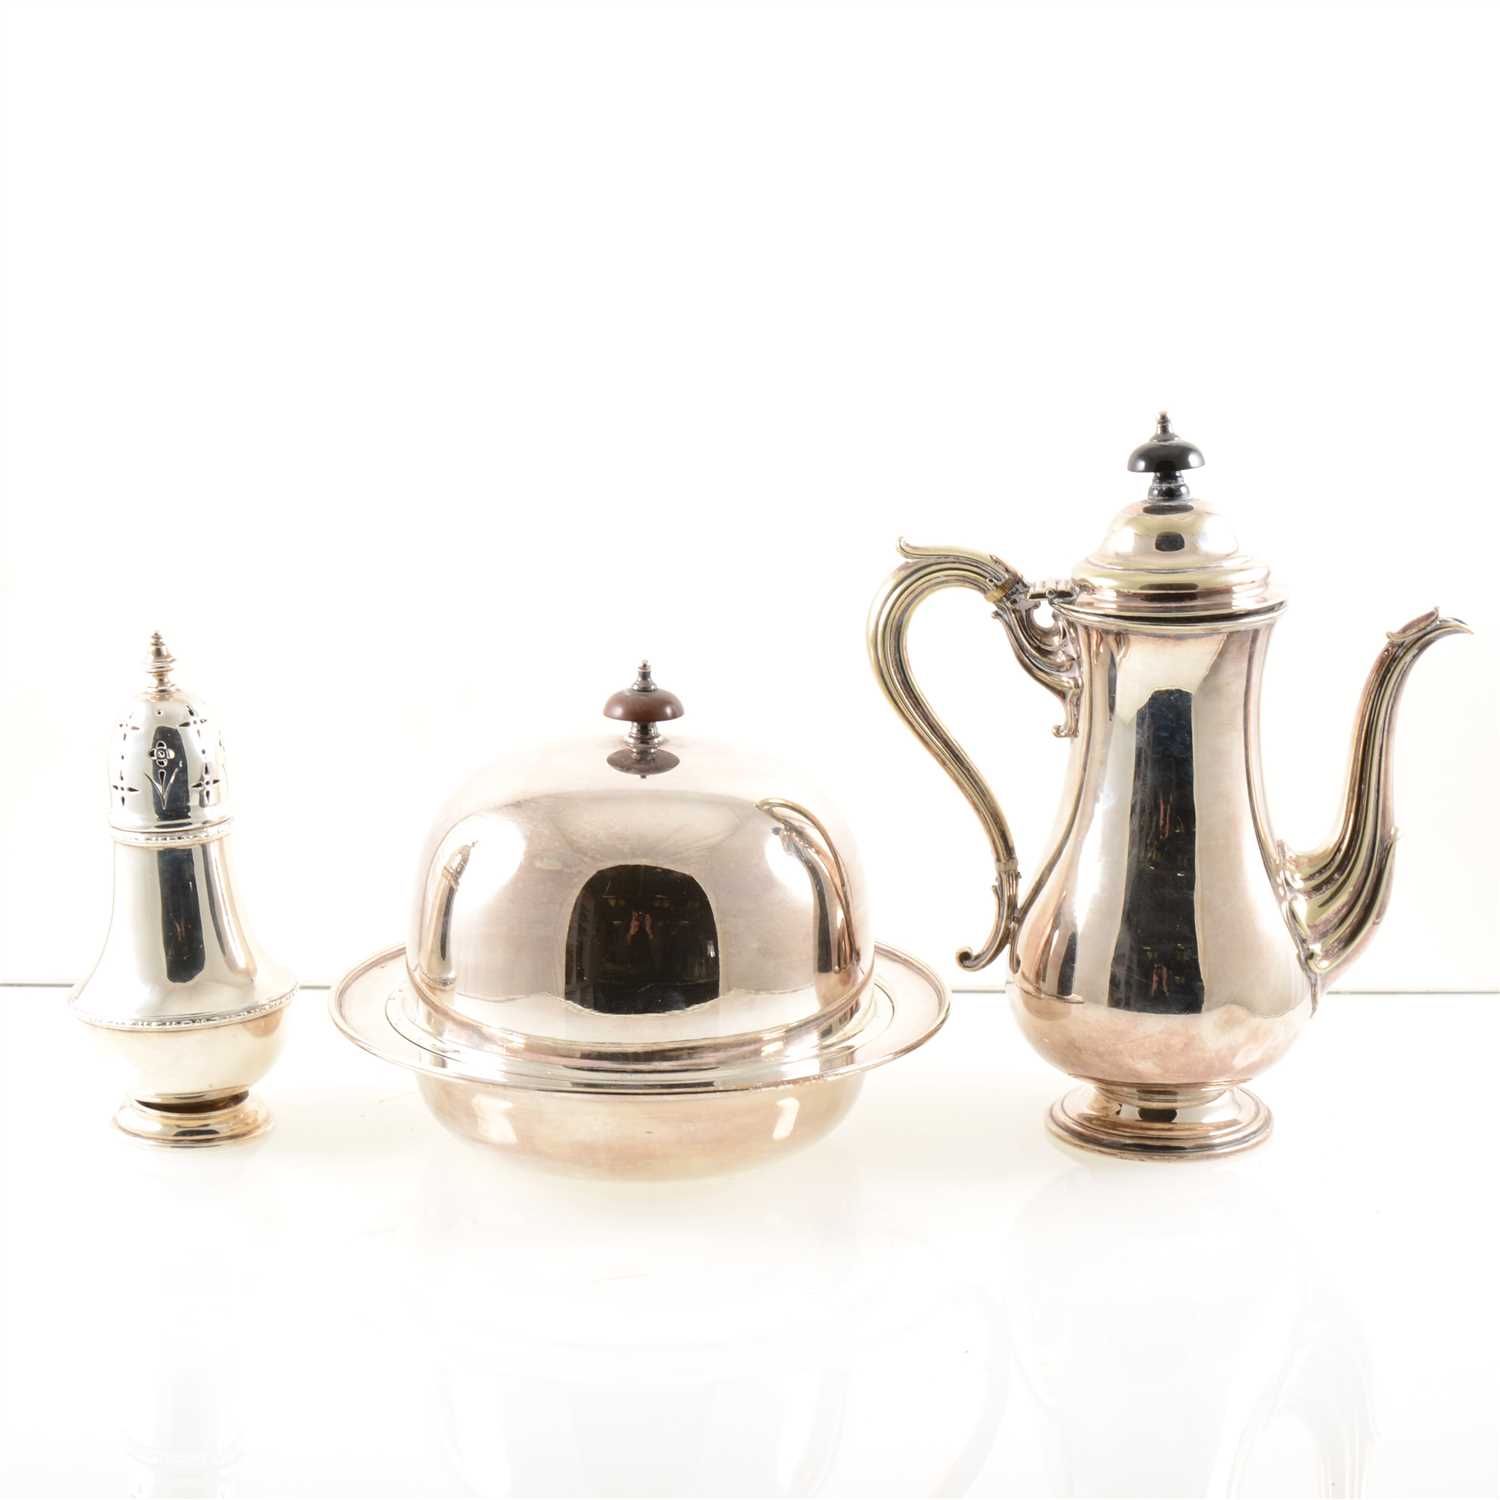 Lot 221 - A collection of silver and silver-plated items, to include a silver sugar dredger, marks rubbed, 12cm, a set of four miniature dredgers by Atkin Brothers, Sheffield 1900, 7cm